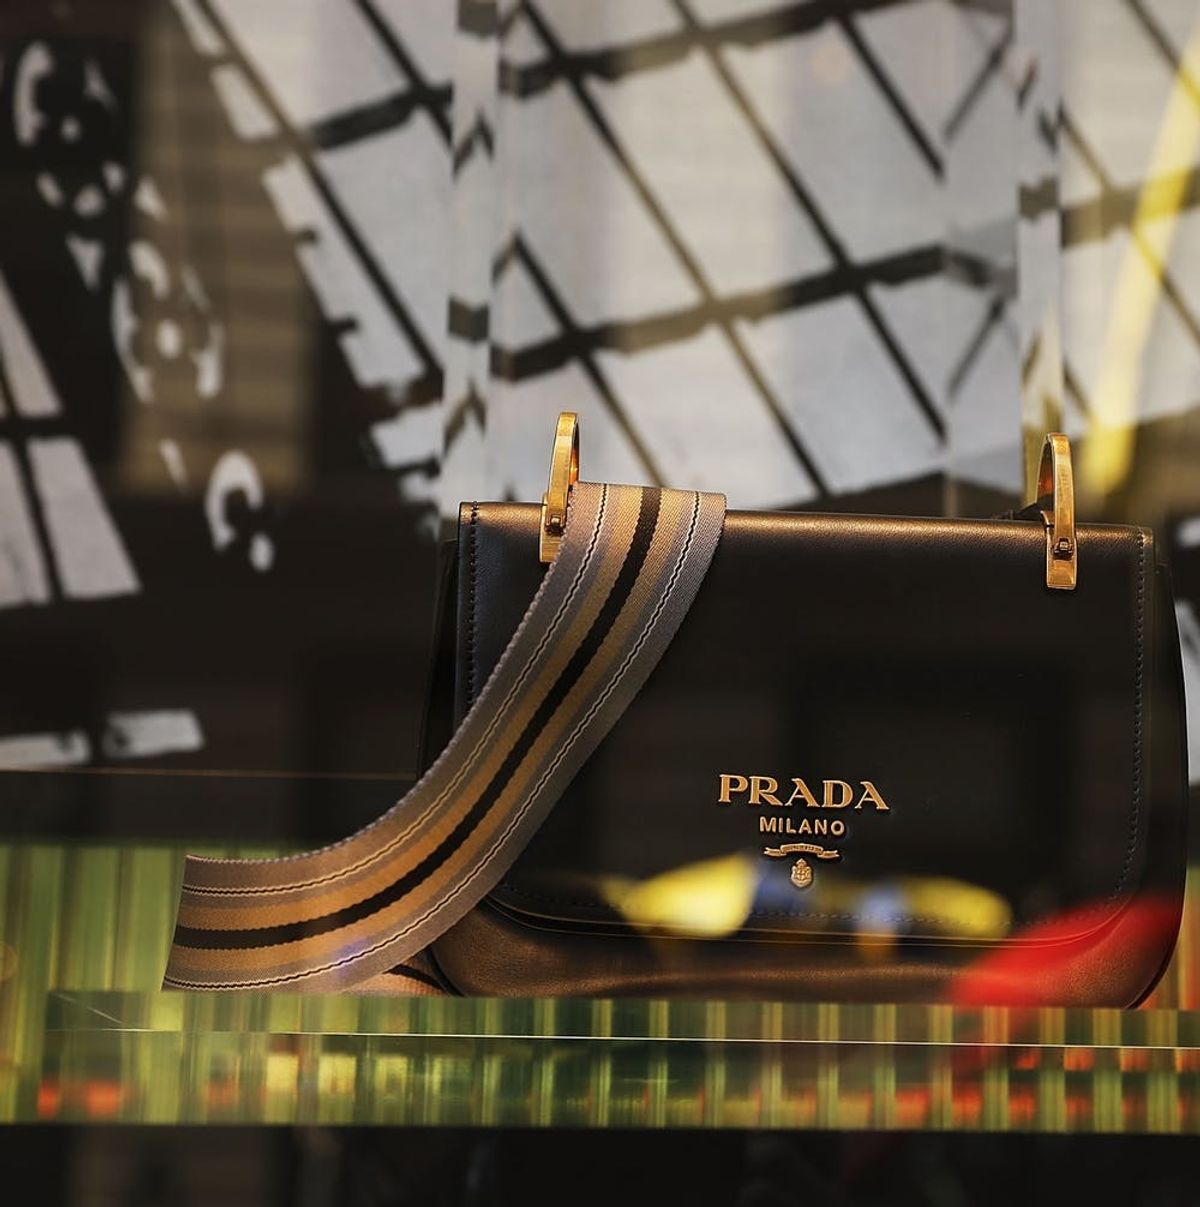 Prada ‘Blackface’ Blunder Served Up Controversy and a Teachable Moment